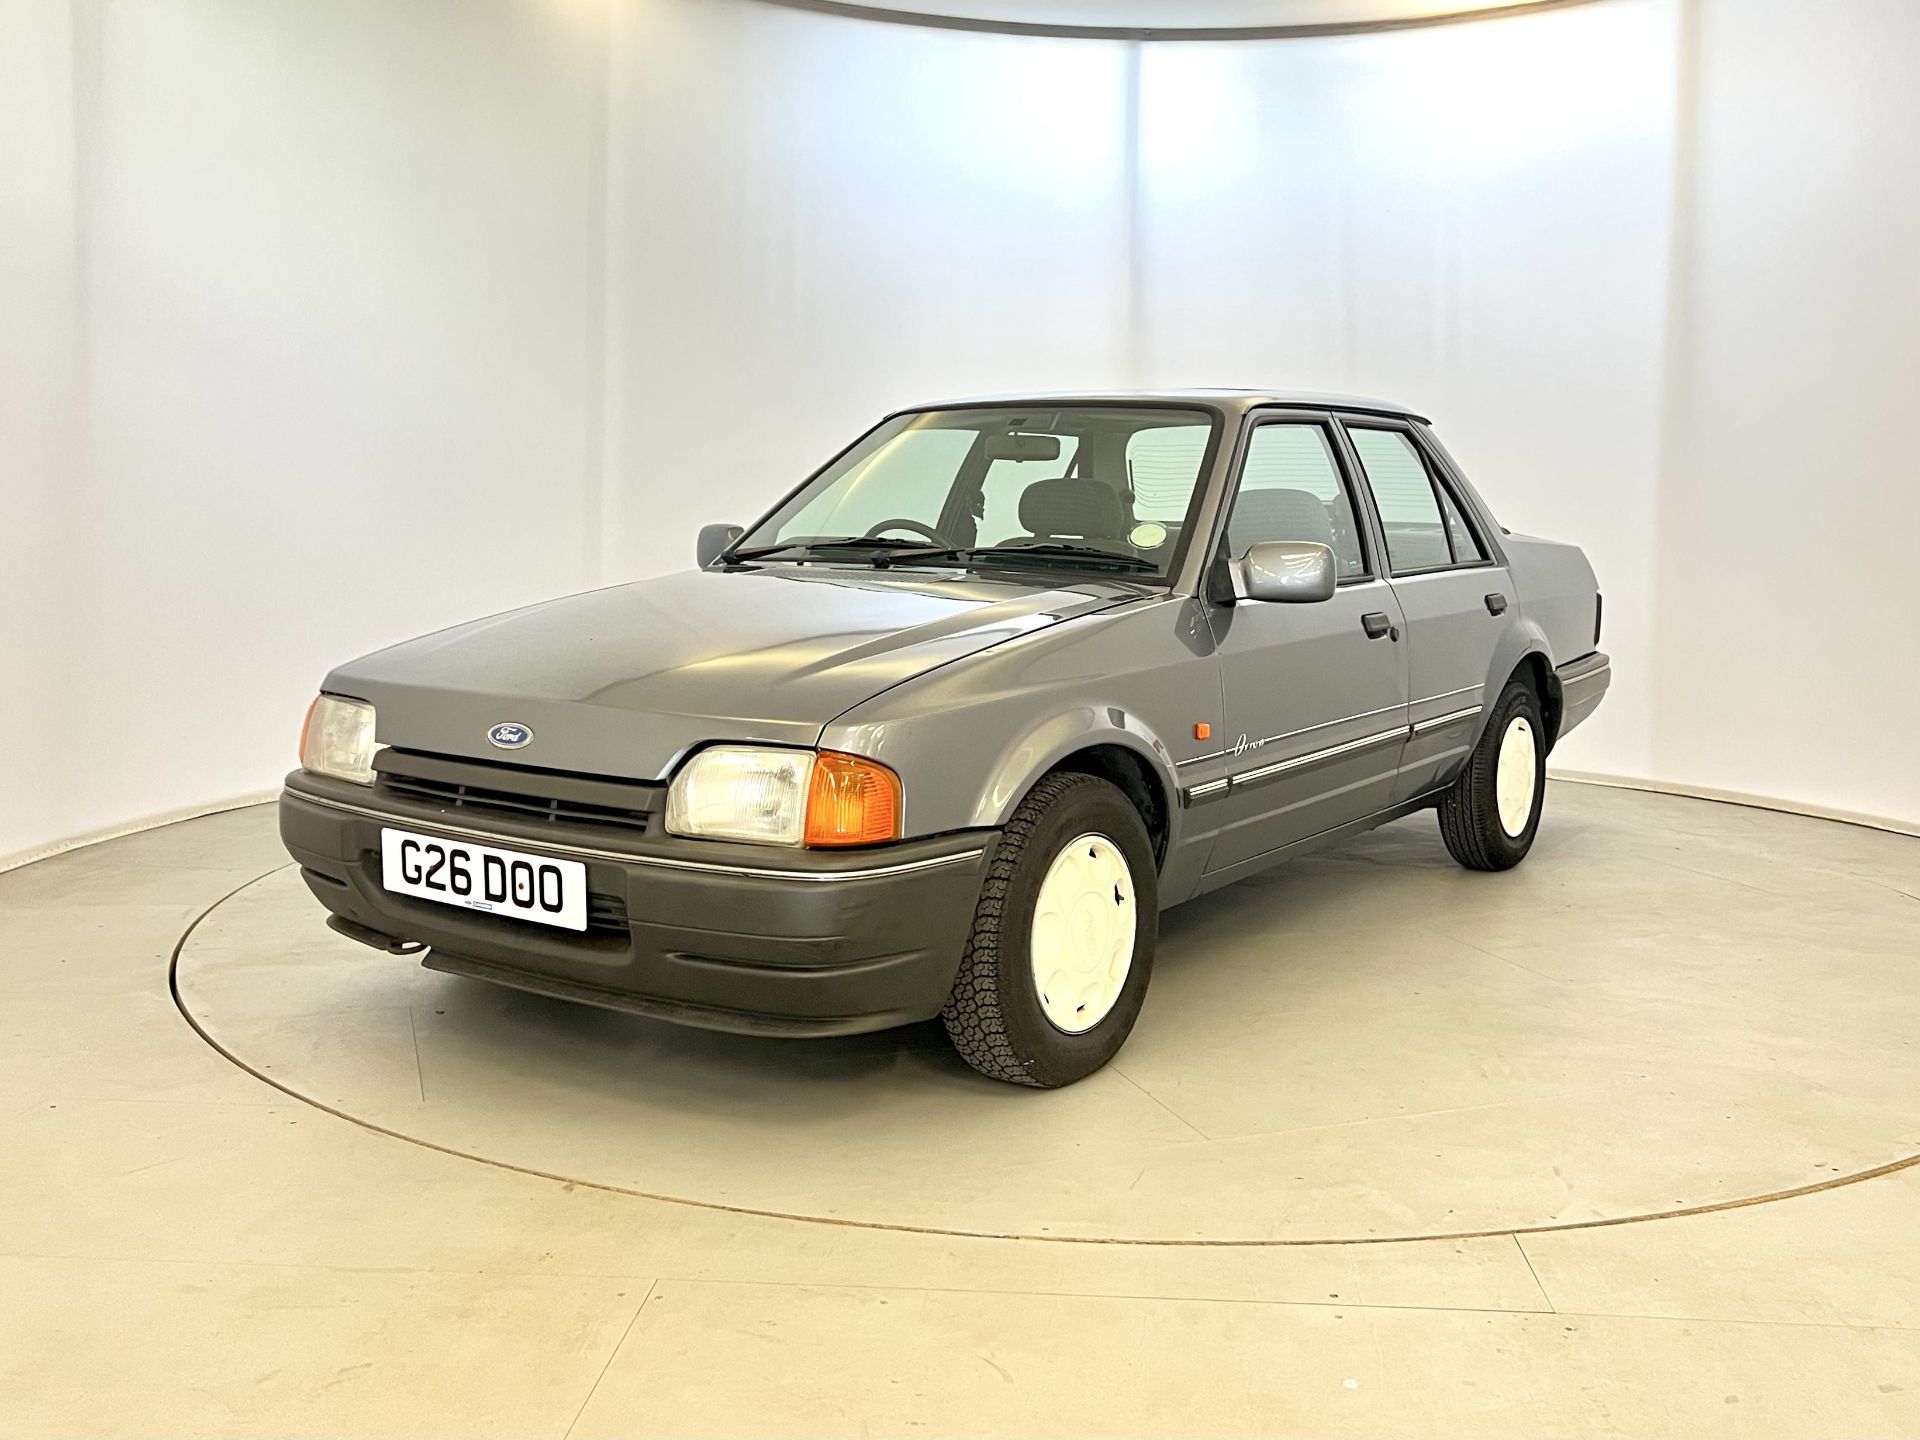 Ford Orion DX - Image 3 of 34